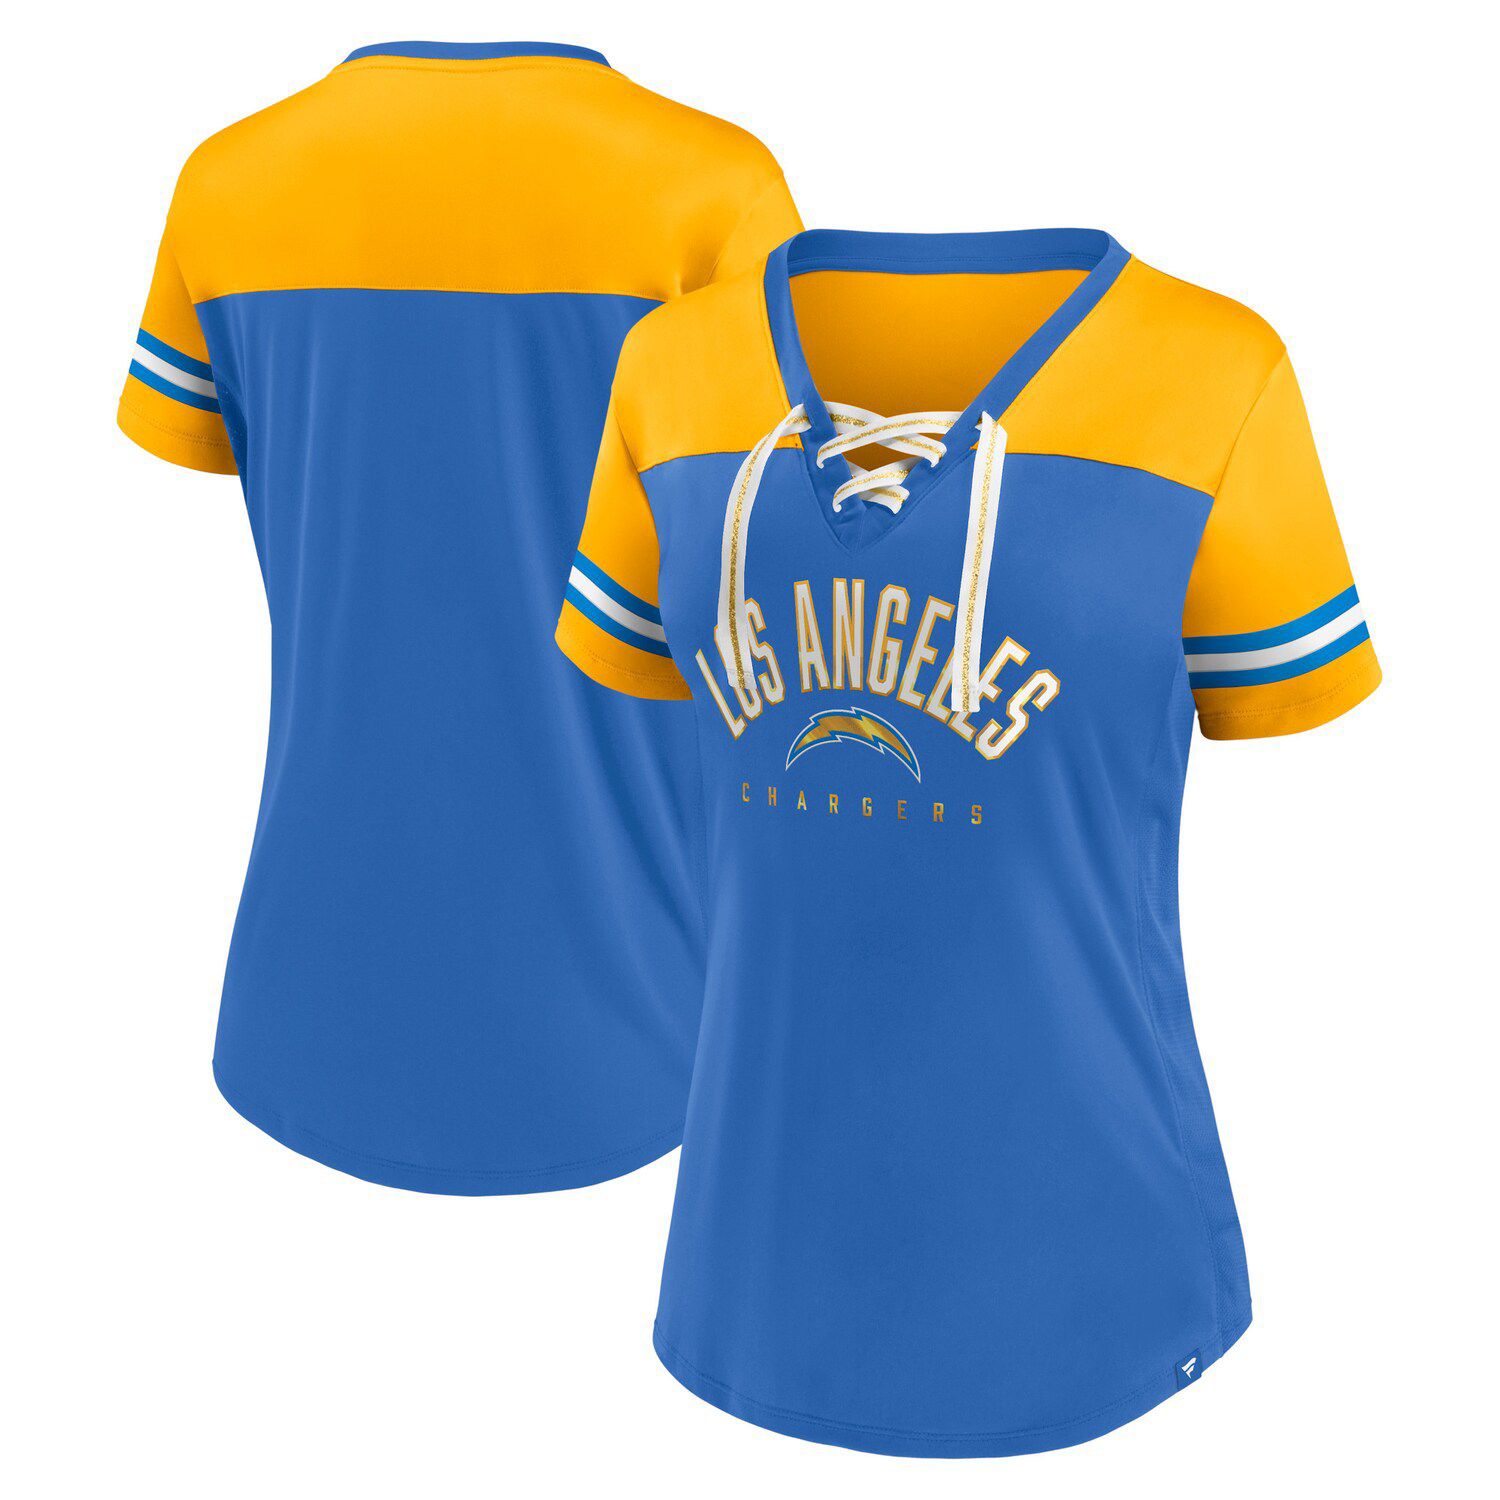 Los Angeles Chargers Women's Jersey